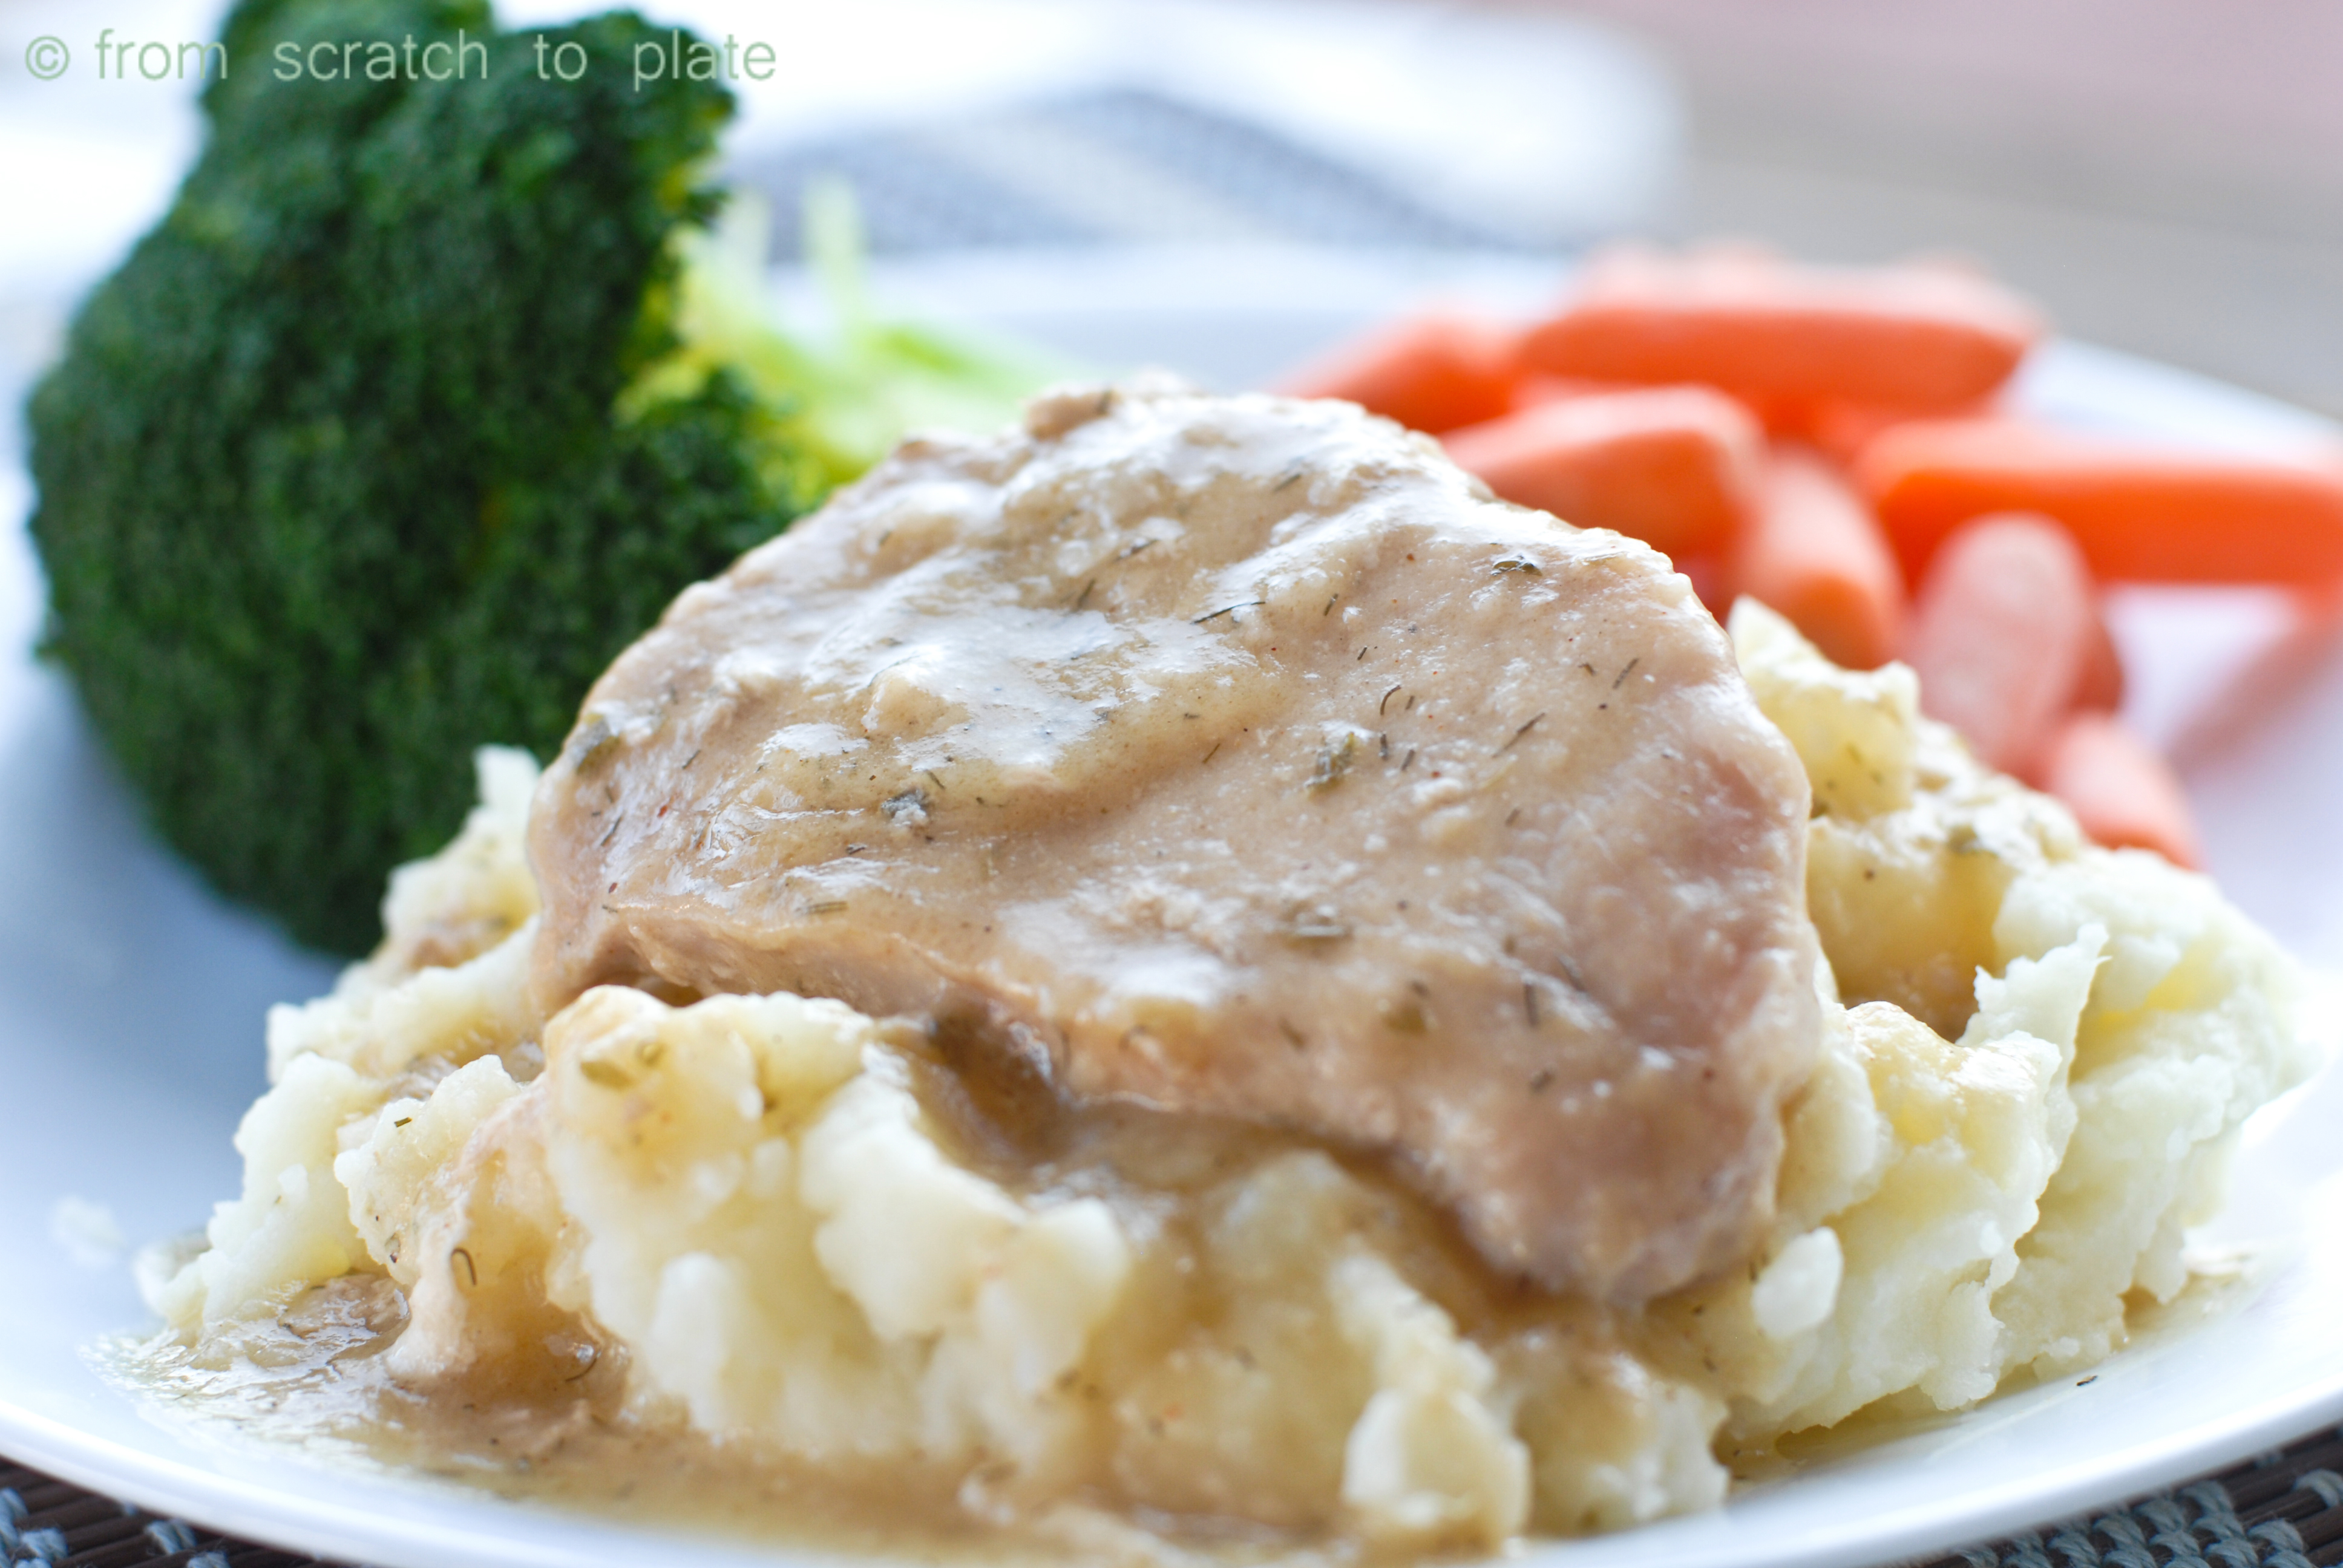 What is an easy Crock-Pot recipe for ranch pork chops?